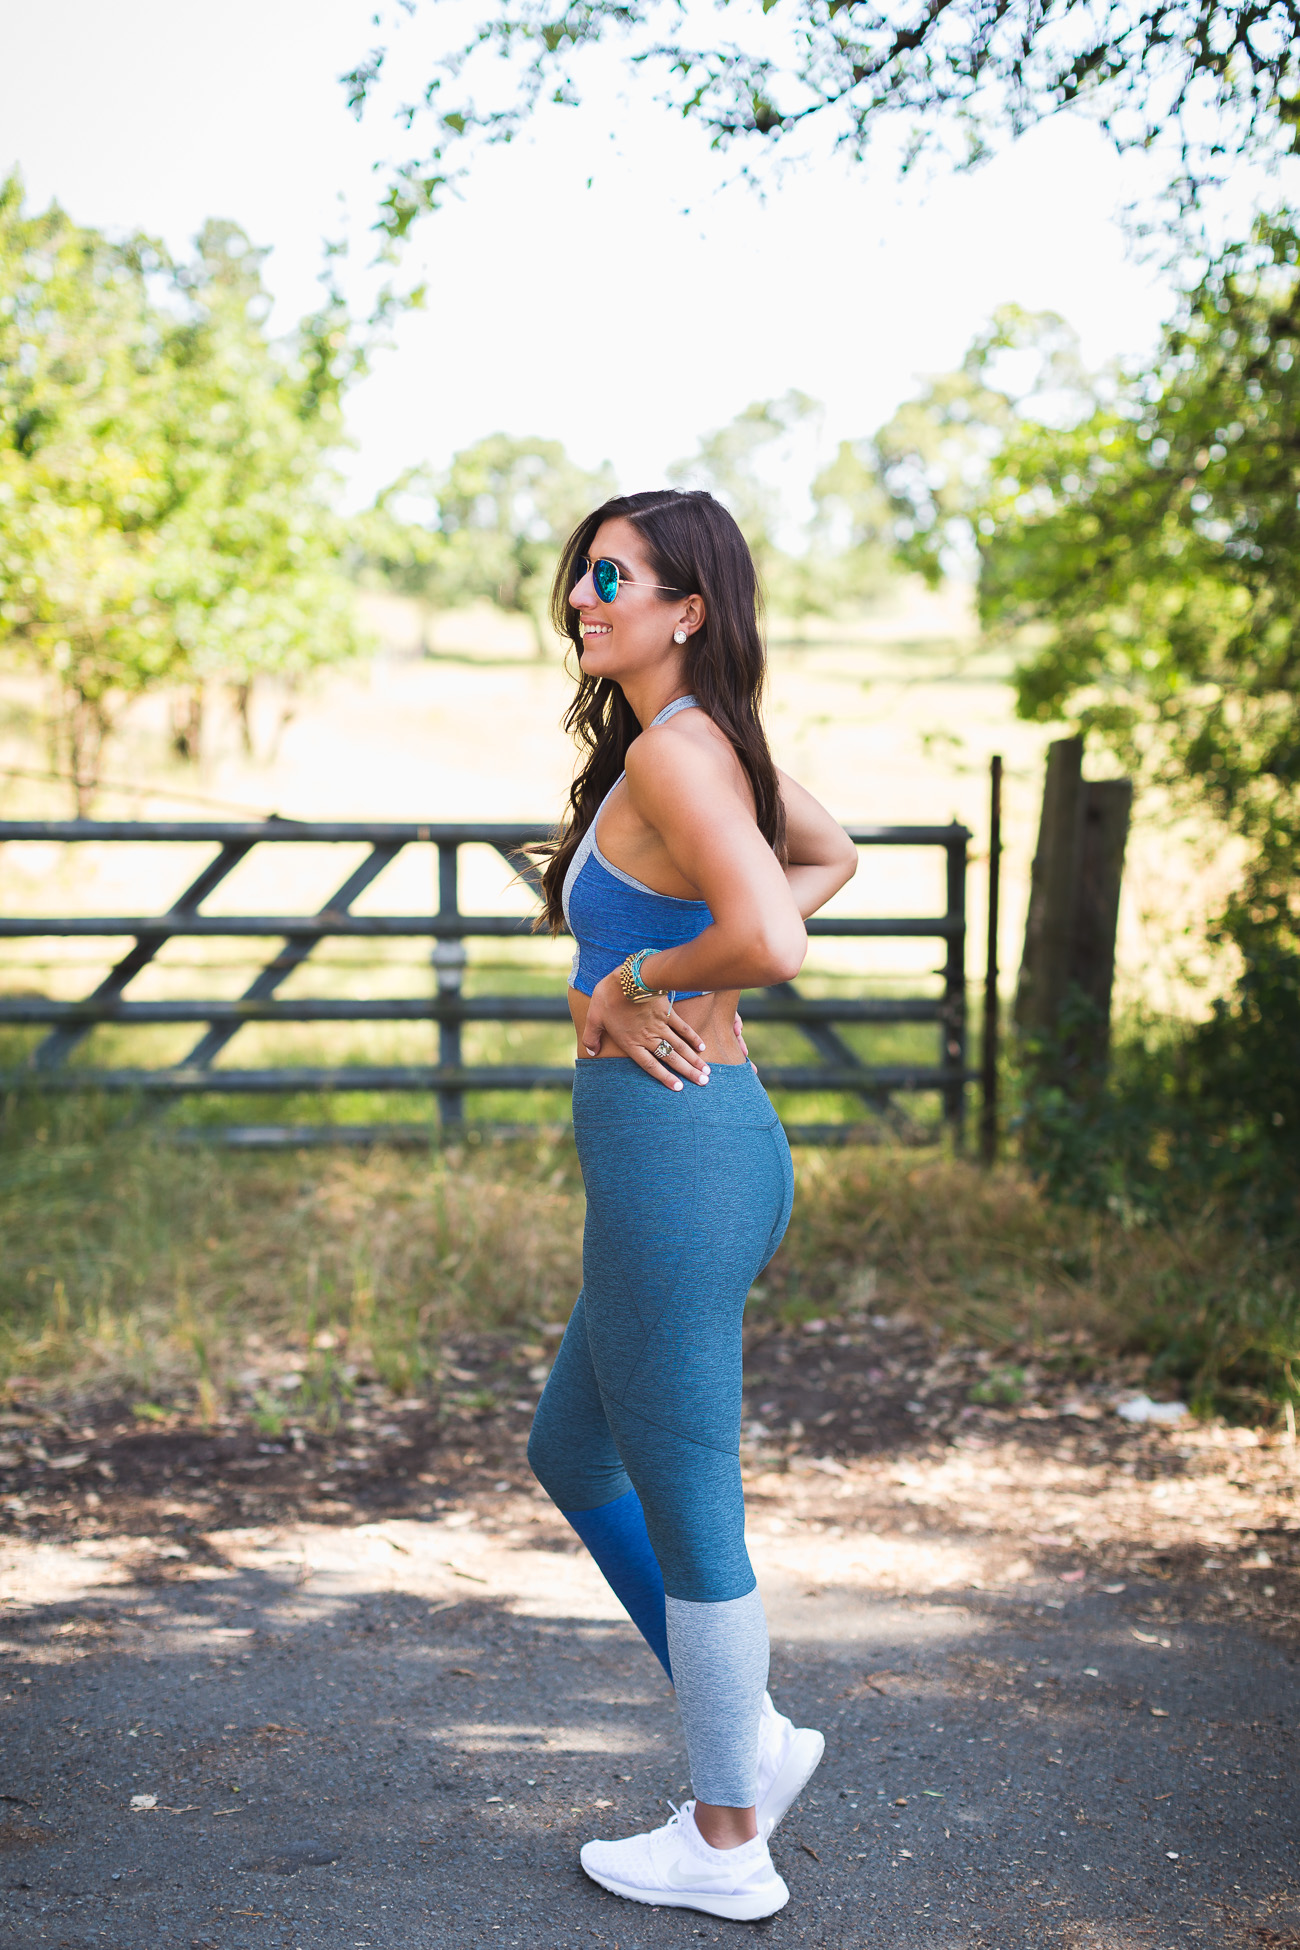 outdoor voices activewear, outdoor voices dipped warmup leggings, outdoor voices athena crop top, compression leggings, fitness, fit life, girl gains, weekly workout routine, weekly leg routine, weightlifting for females, athleisure outfits, activewear outfits, stylish activewear, outdoor voices leggings // Grace Wainwright A Southern Drawl